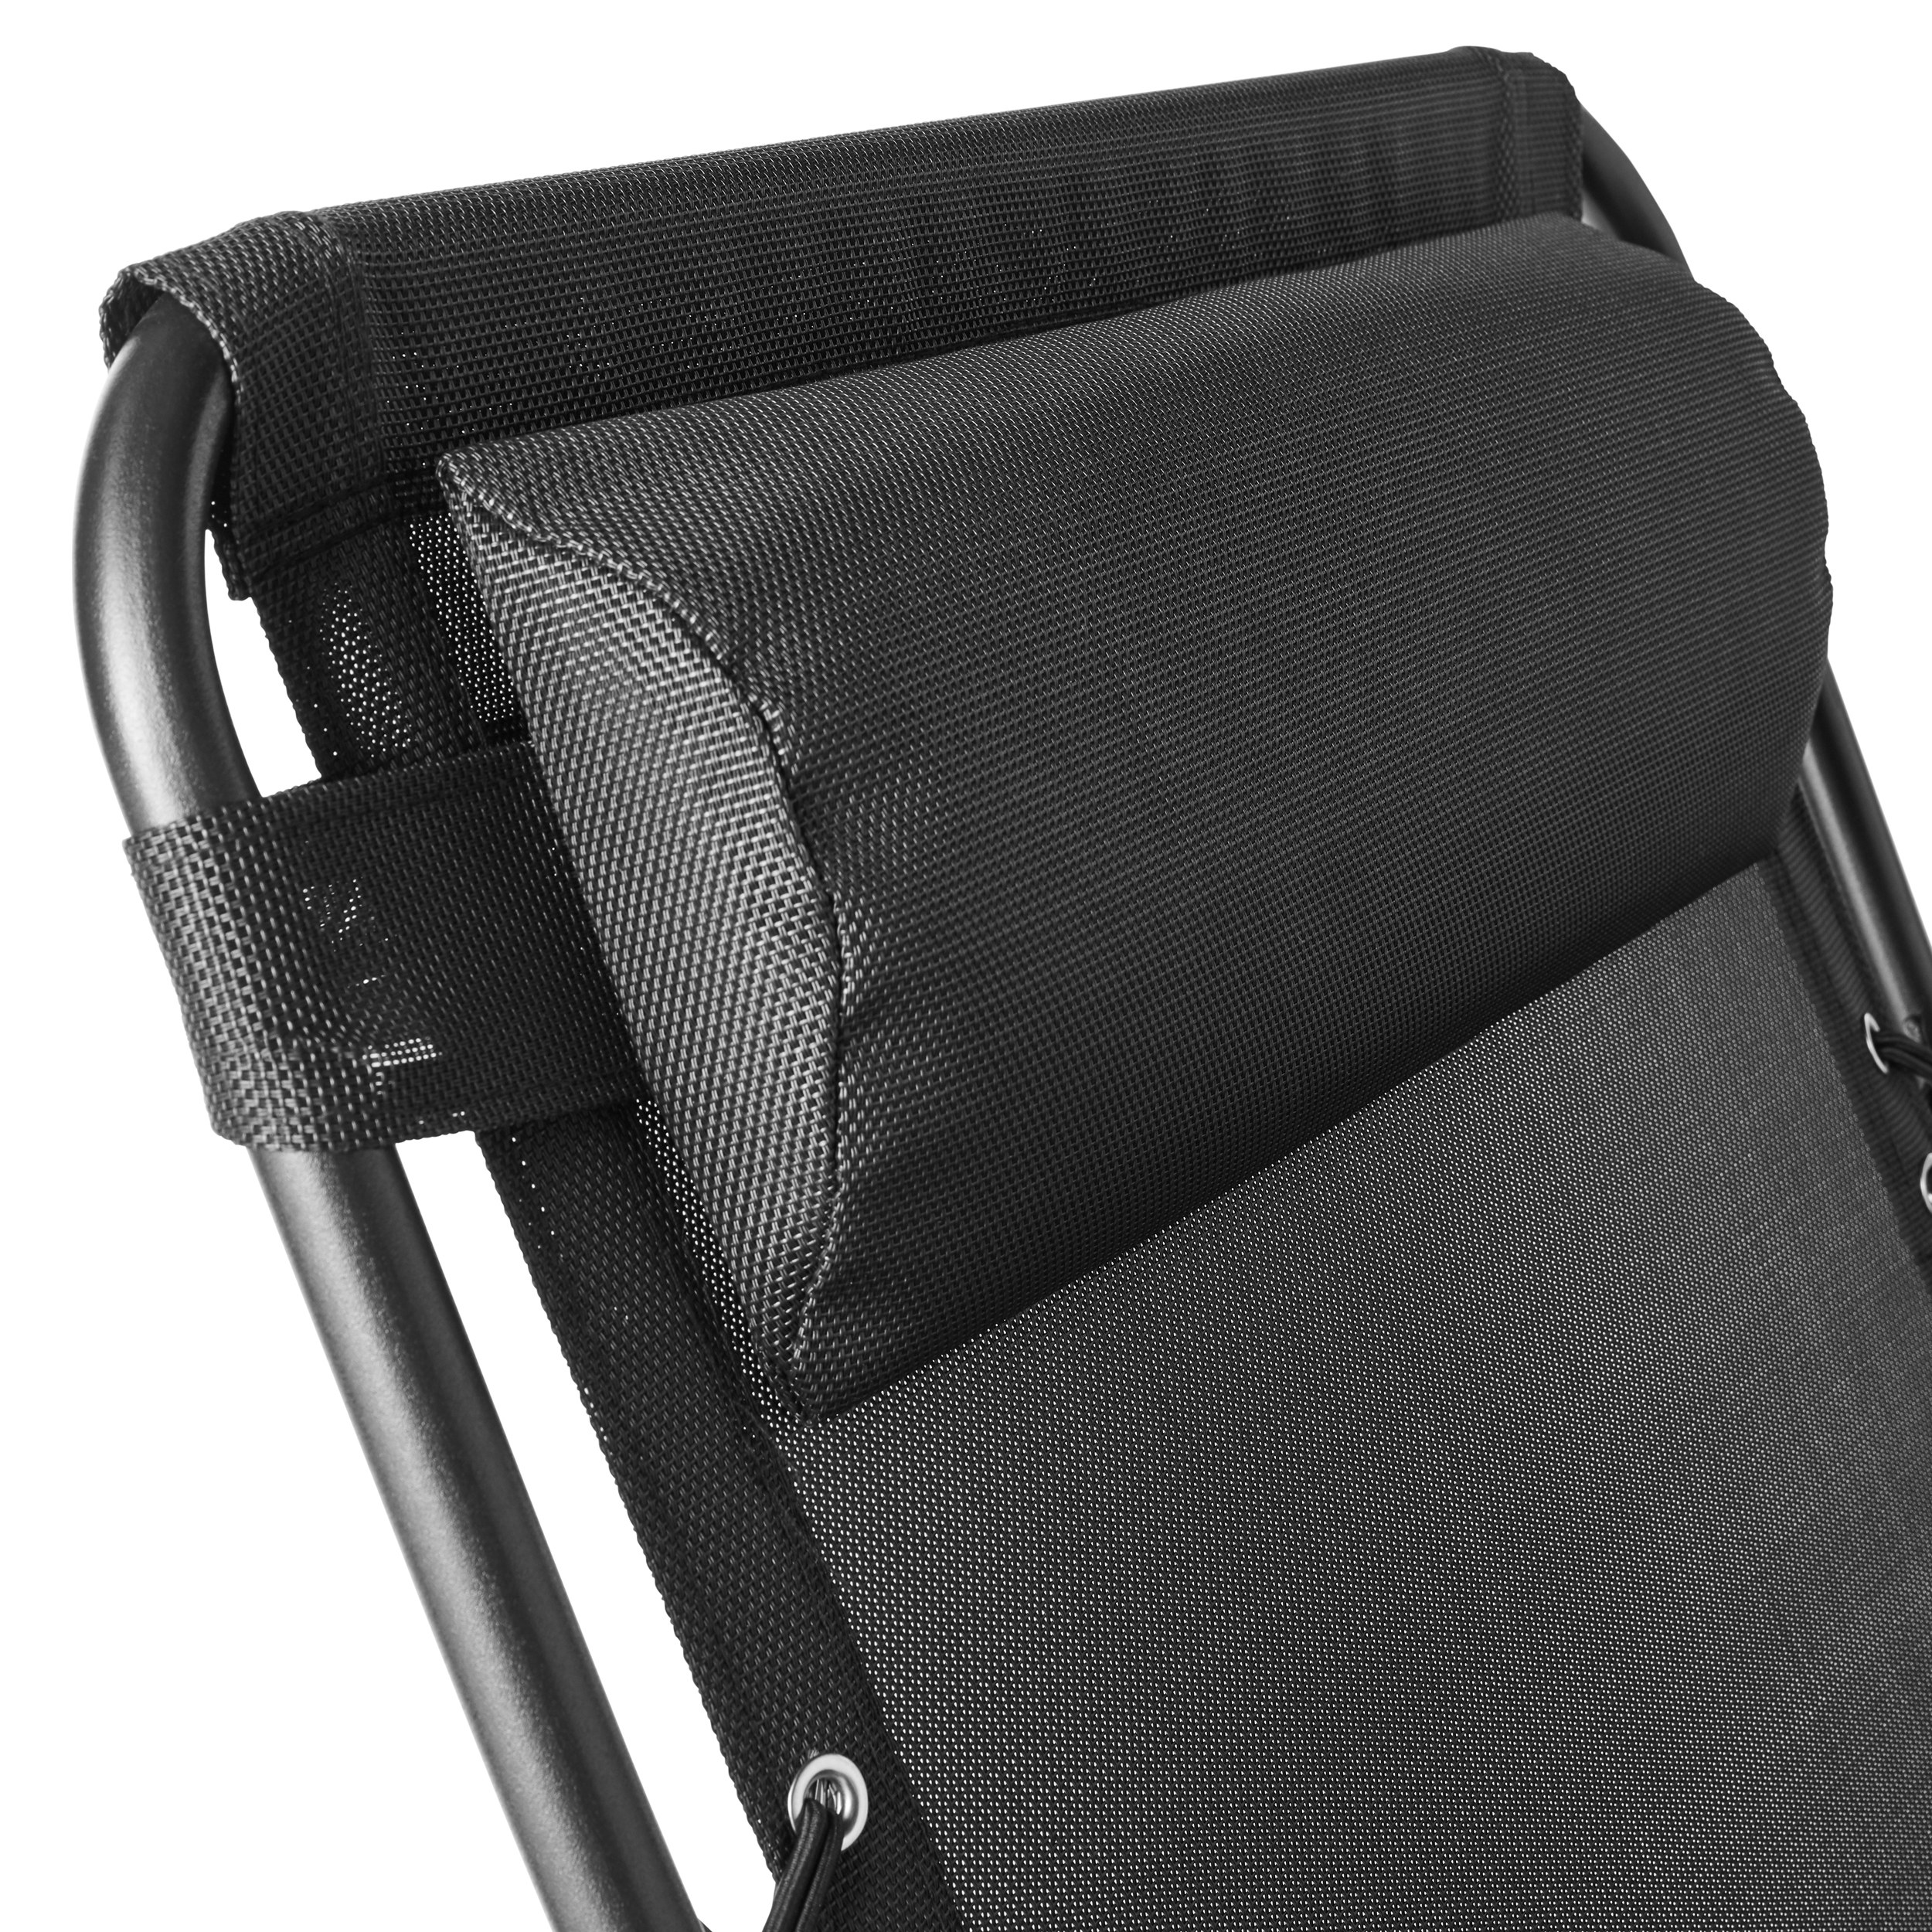 Mainstays 2-Seat Reclining Oversized Zero-Gravity Swing with Canopy and Center Storage Console, Black - image 3 of 8